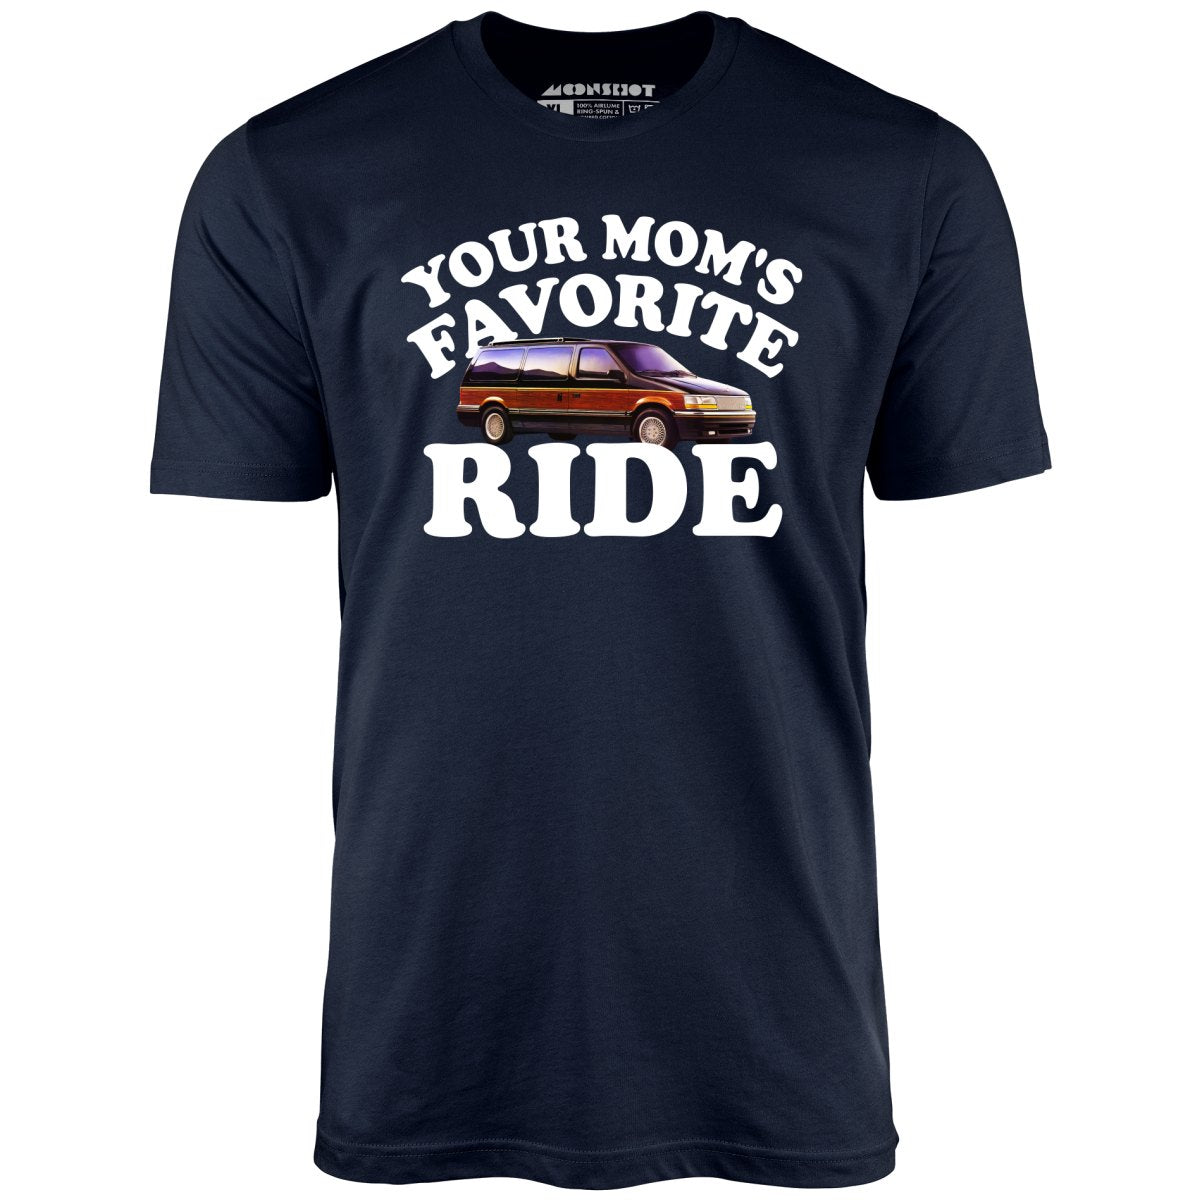 Your Mom's Favorite Ride - Unisex T-Shirt